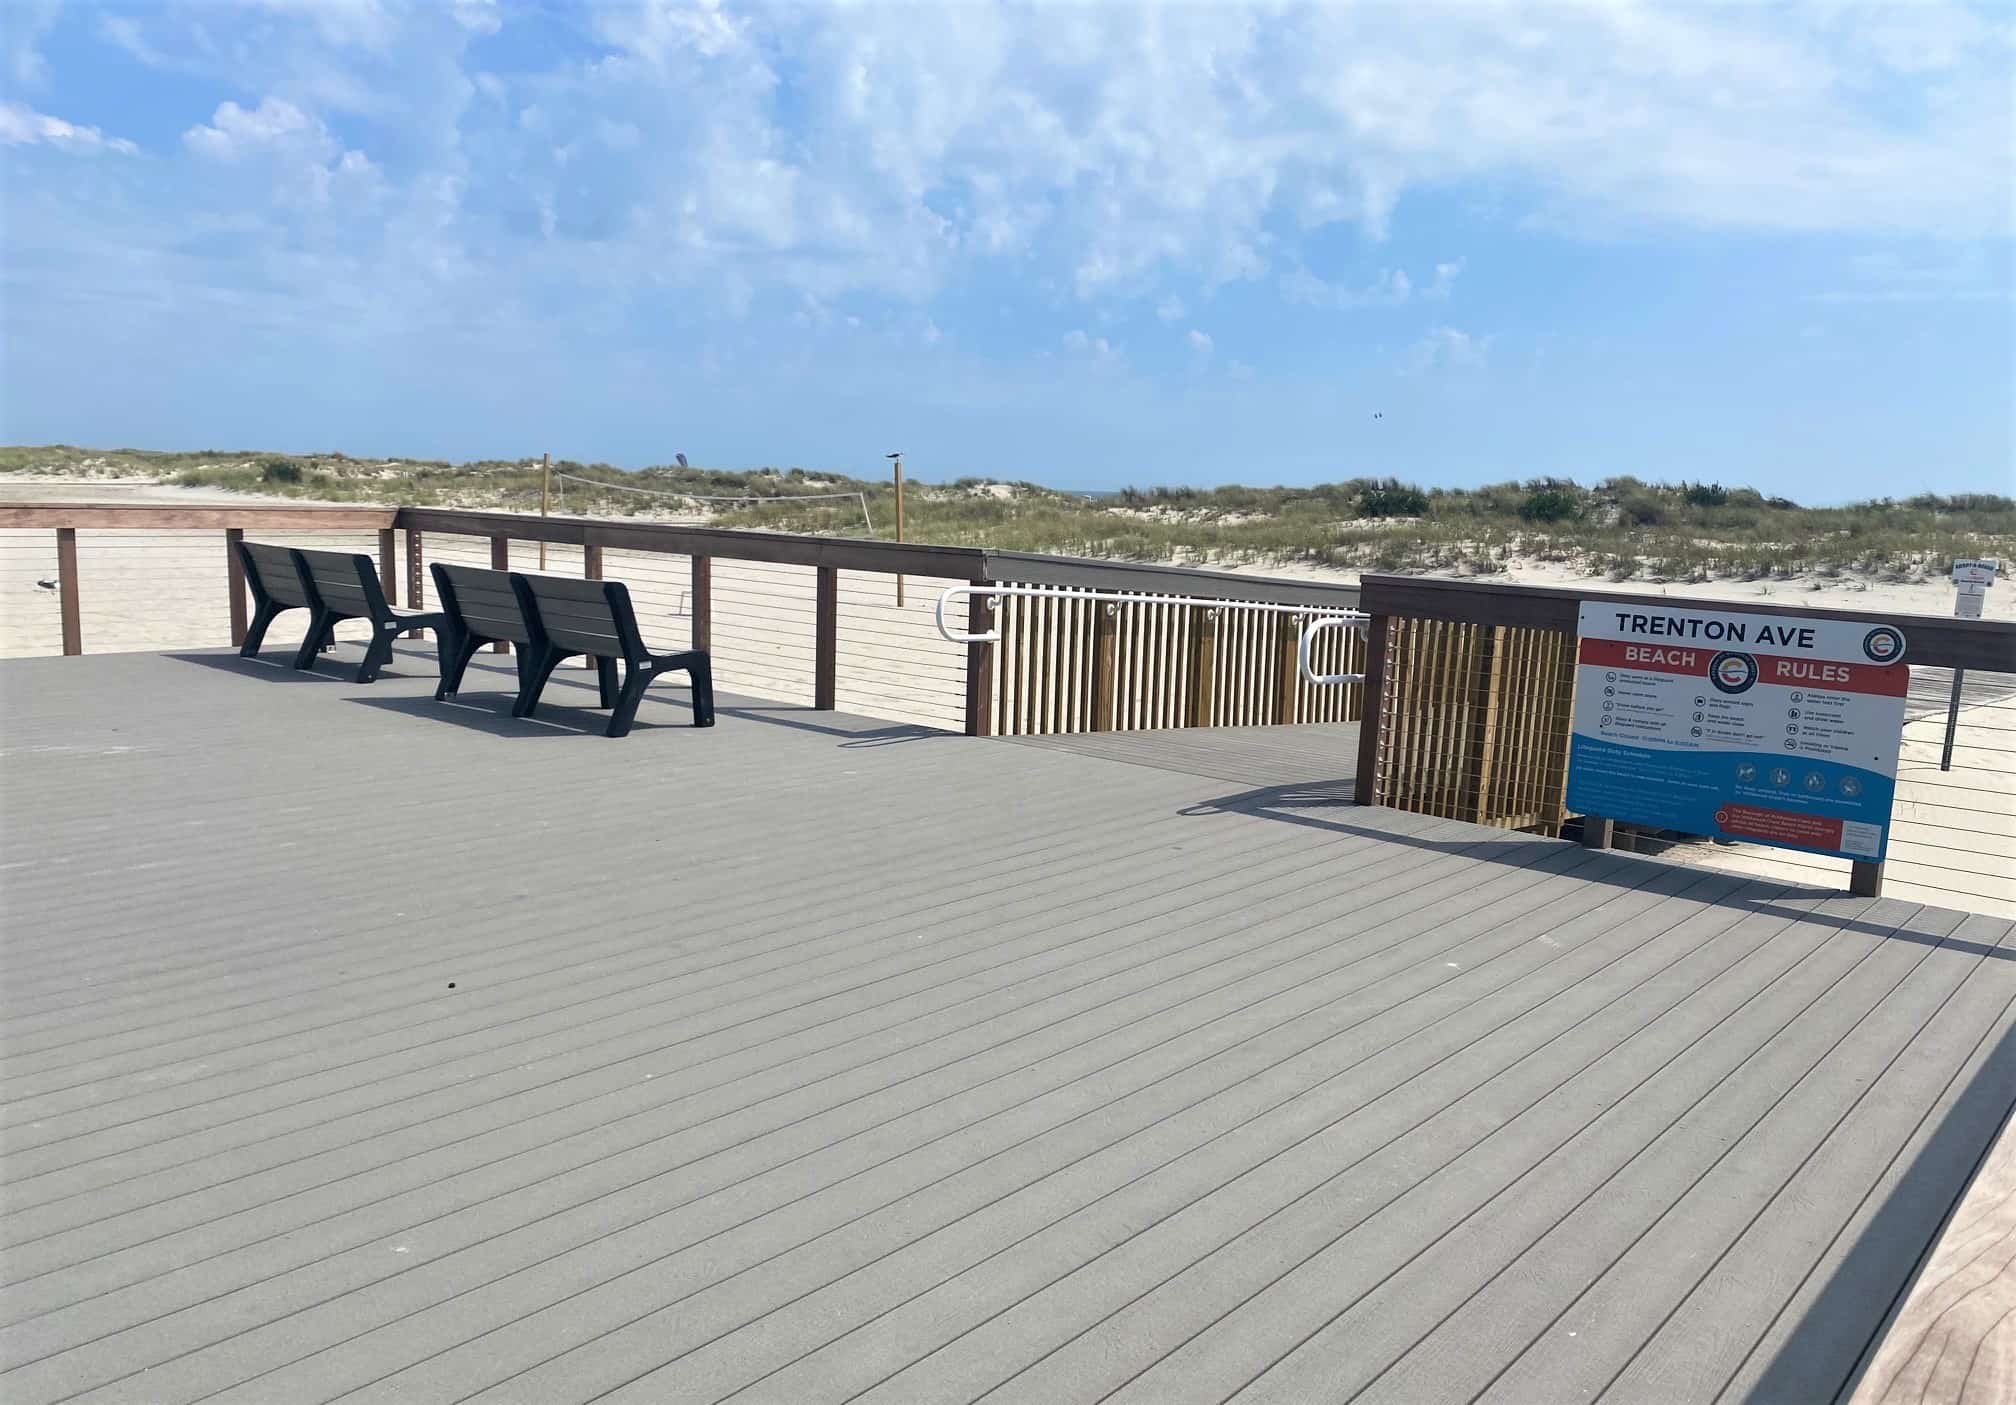 Wildwood Crest Continues With Improved Beach Access Areas